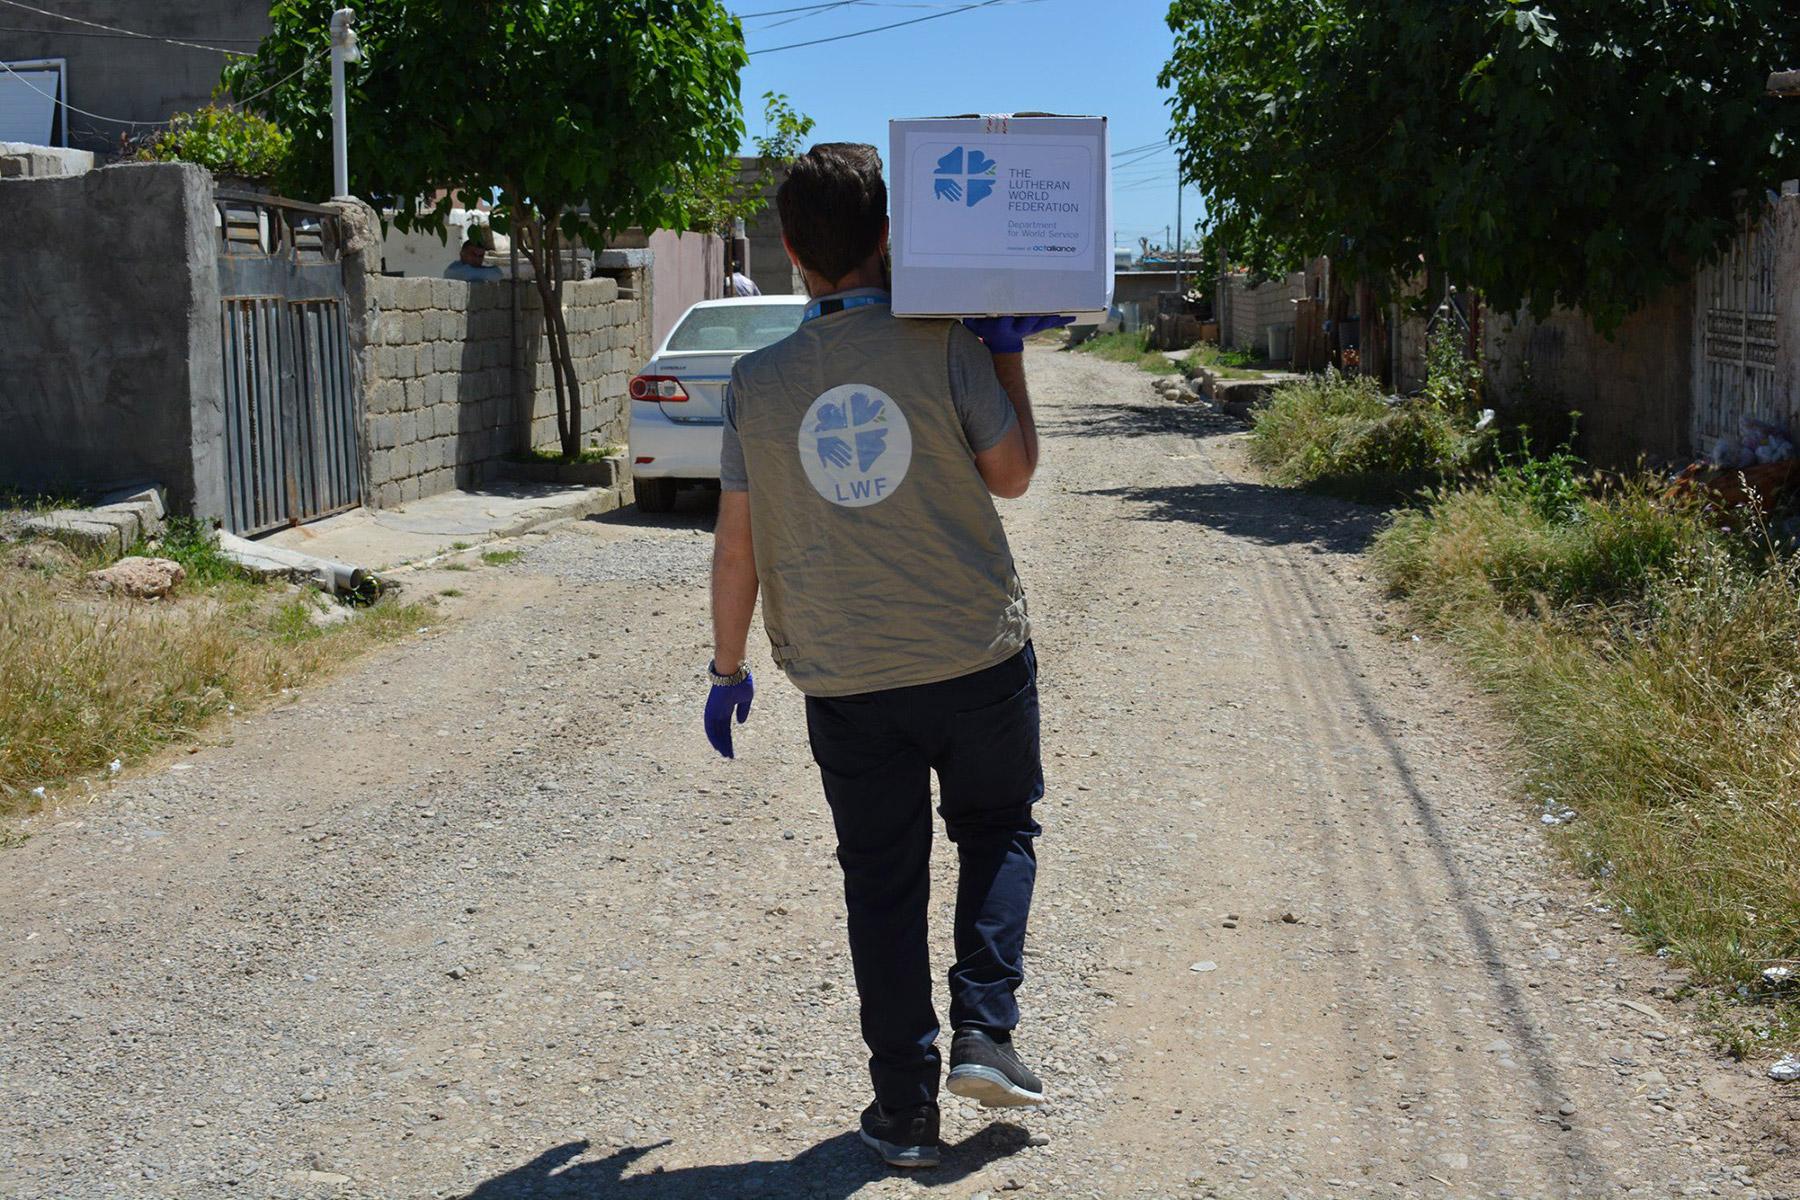 The LWF team in Northern Iraq distributed food aid to vulnerable families in Summel District in Dohuk Governorate. To respond to #COVID19, the government has issued movement restrictions and other measures which impact on the livelihood of many families. Photo: LWF Iraq